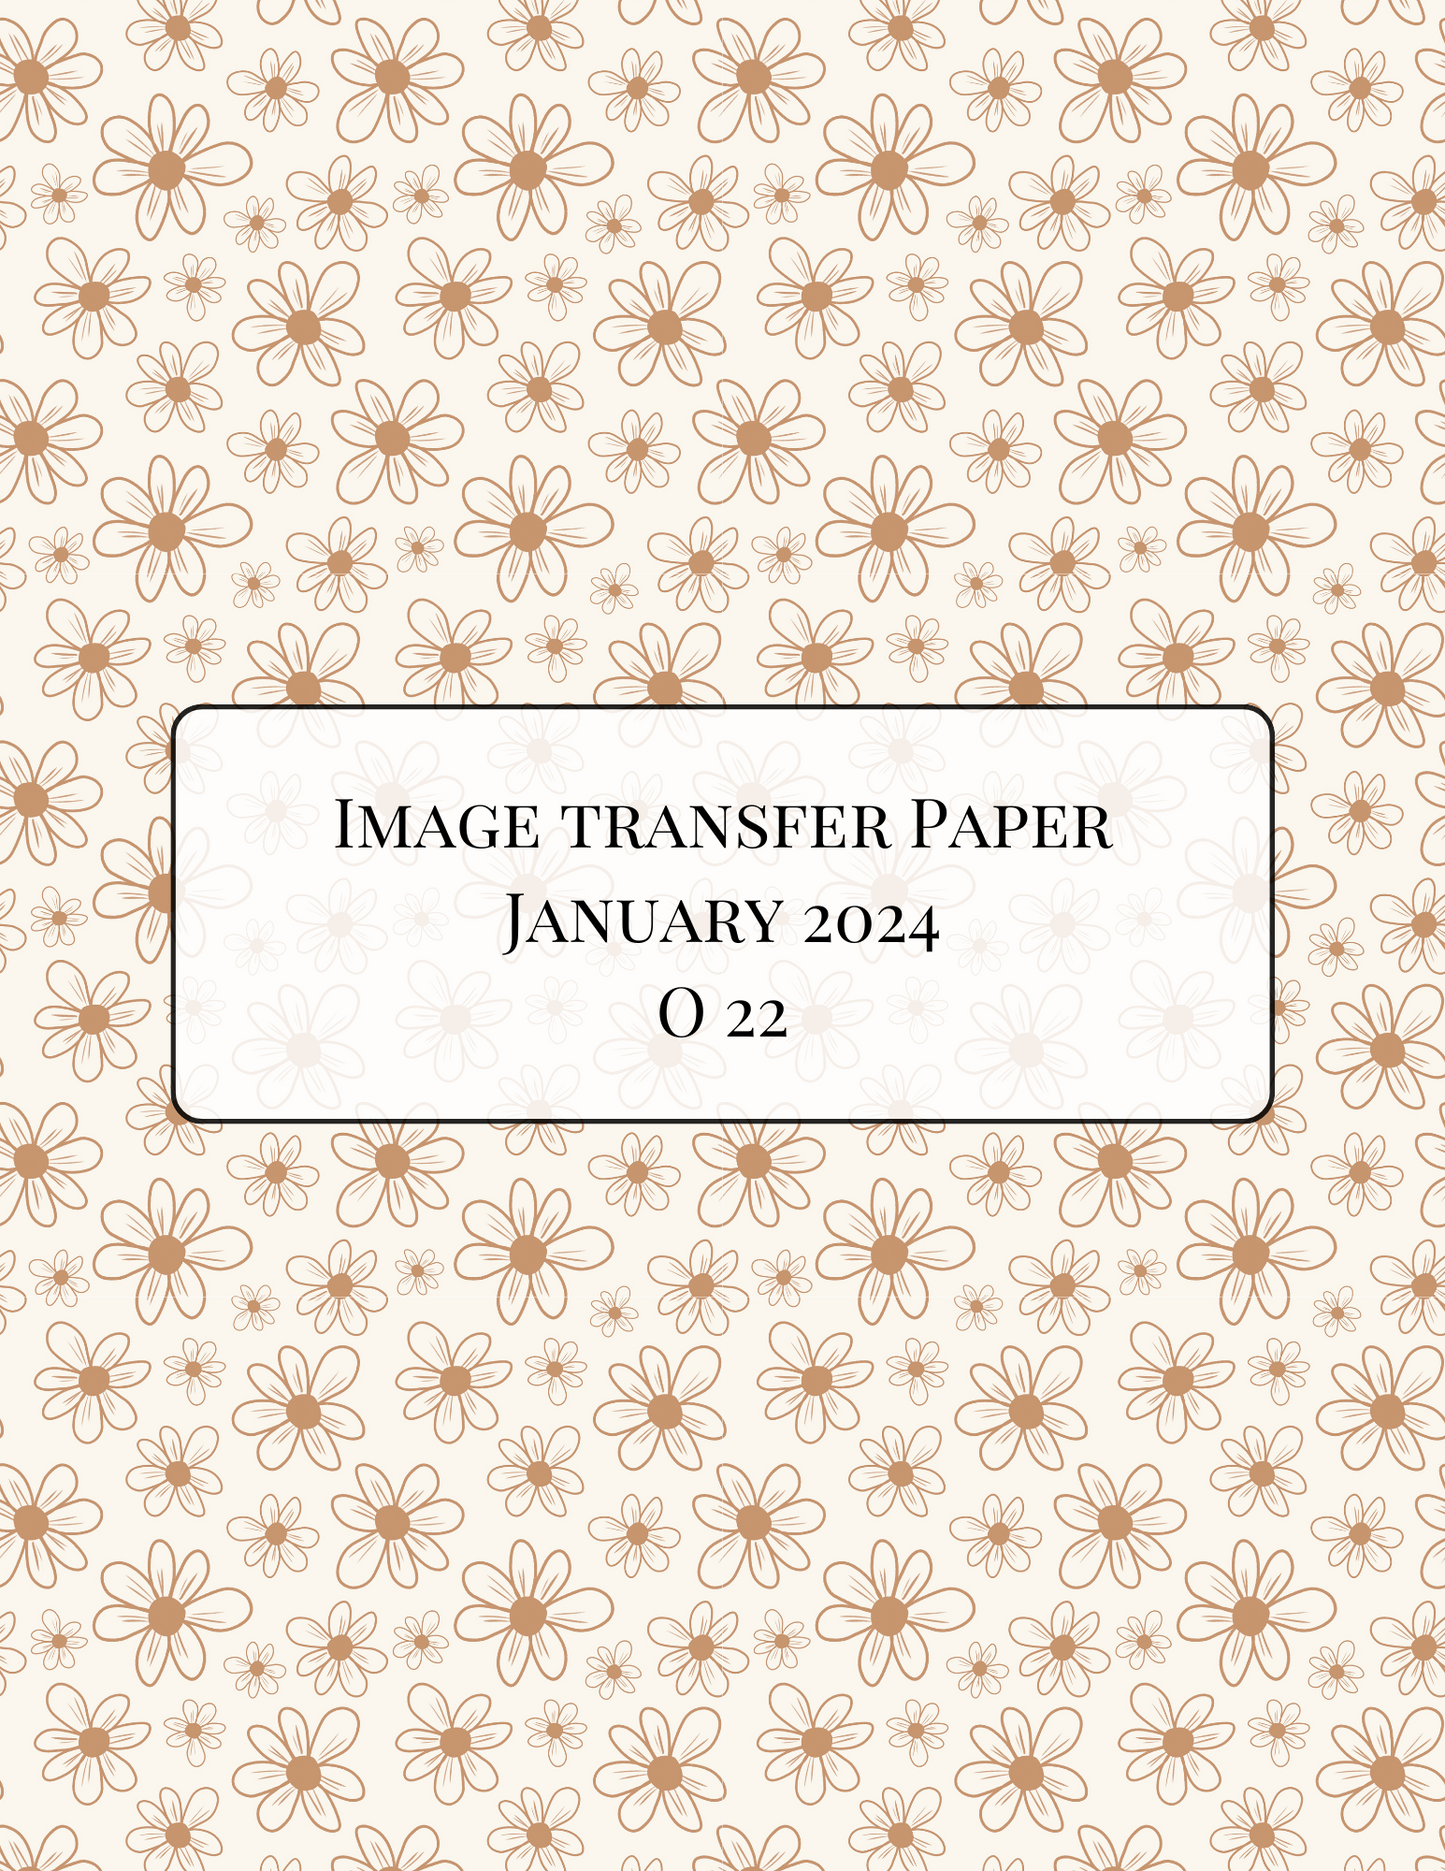 O22 Transfer Paper - January Launch